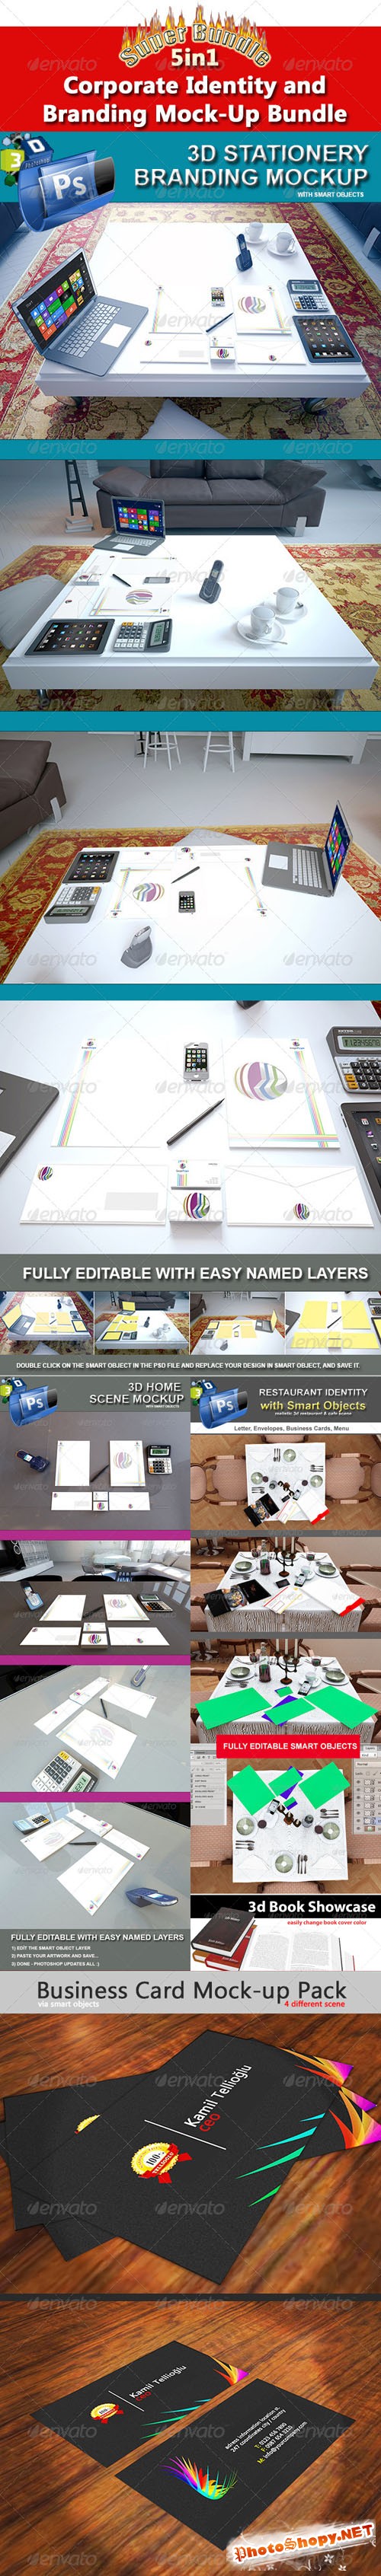 GraphicRiver - Corporate Identity and Branding Mock-Up Bundle 5092397